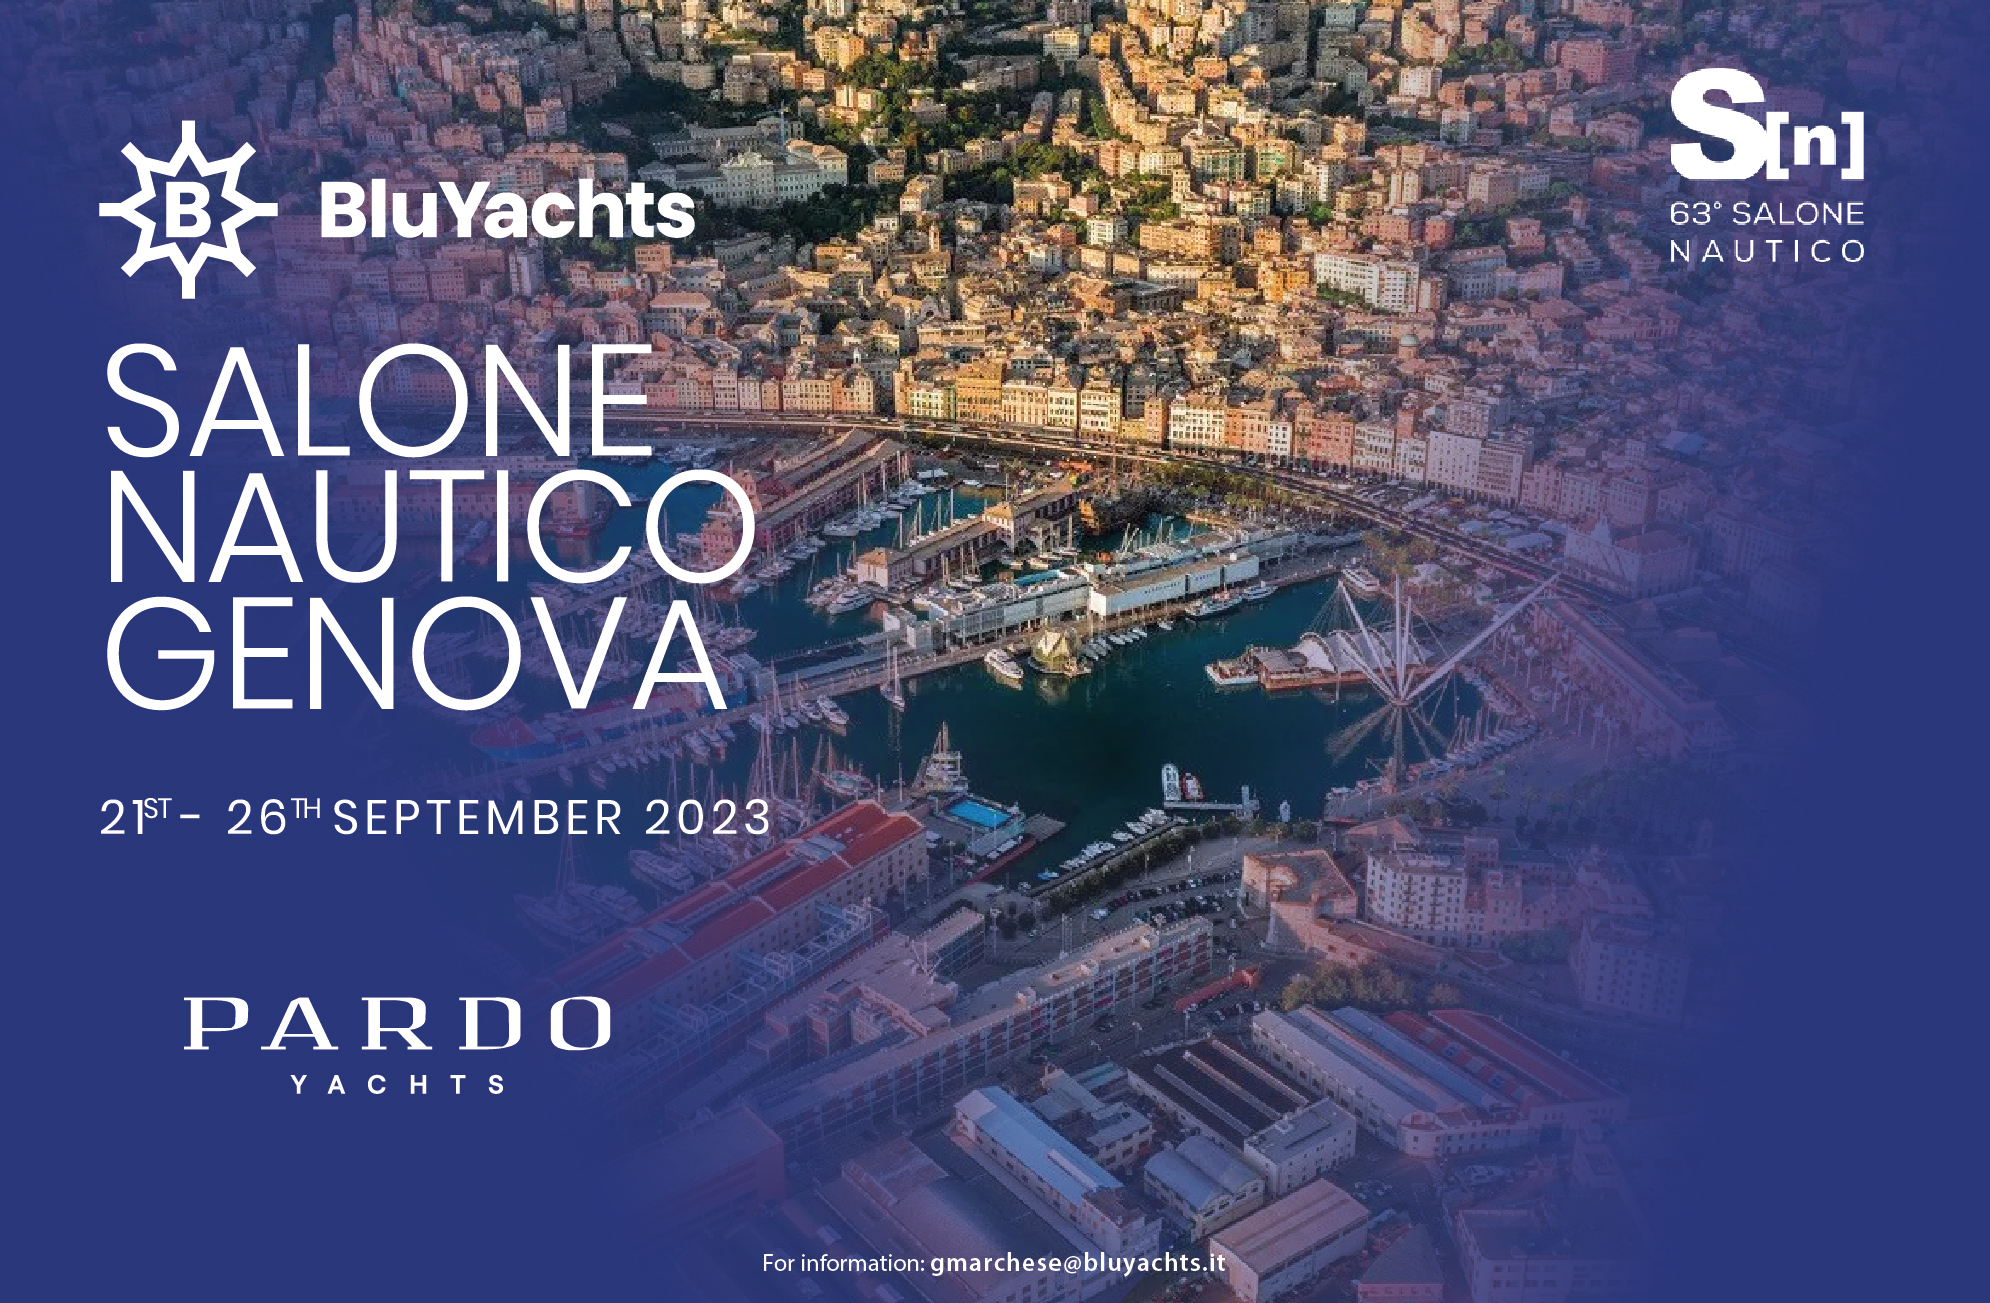 We are glad to invite you to the GENOVA BOAT SHOW from the 21st September to the 26th September 2023.